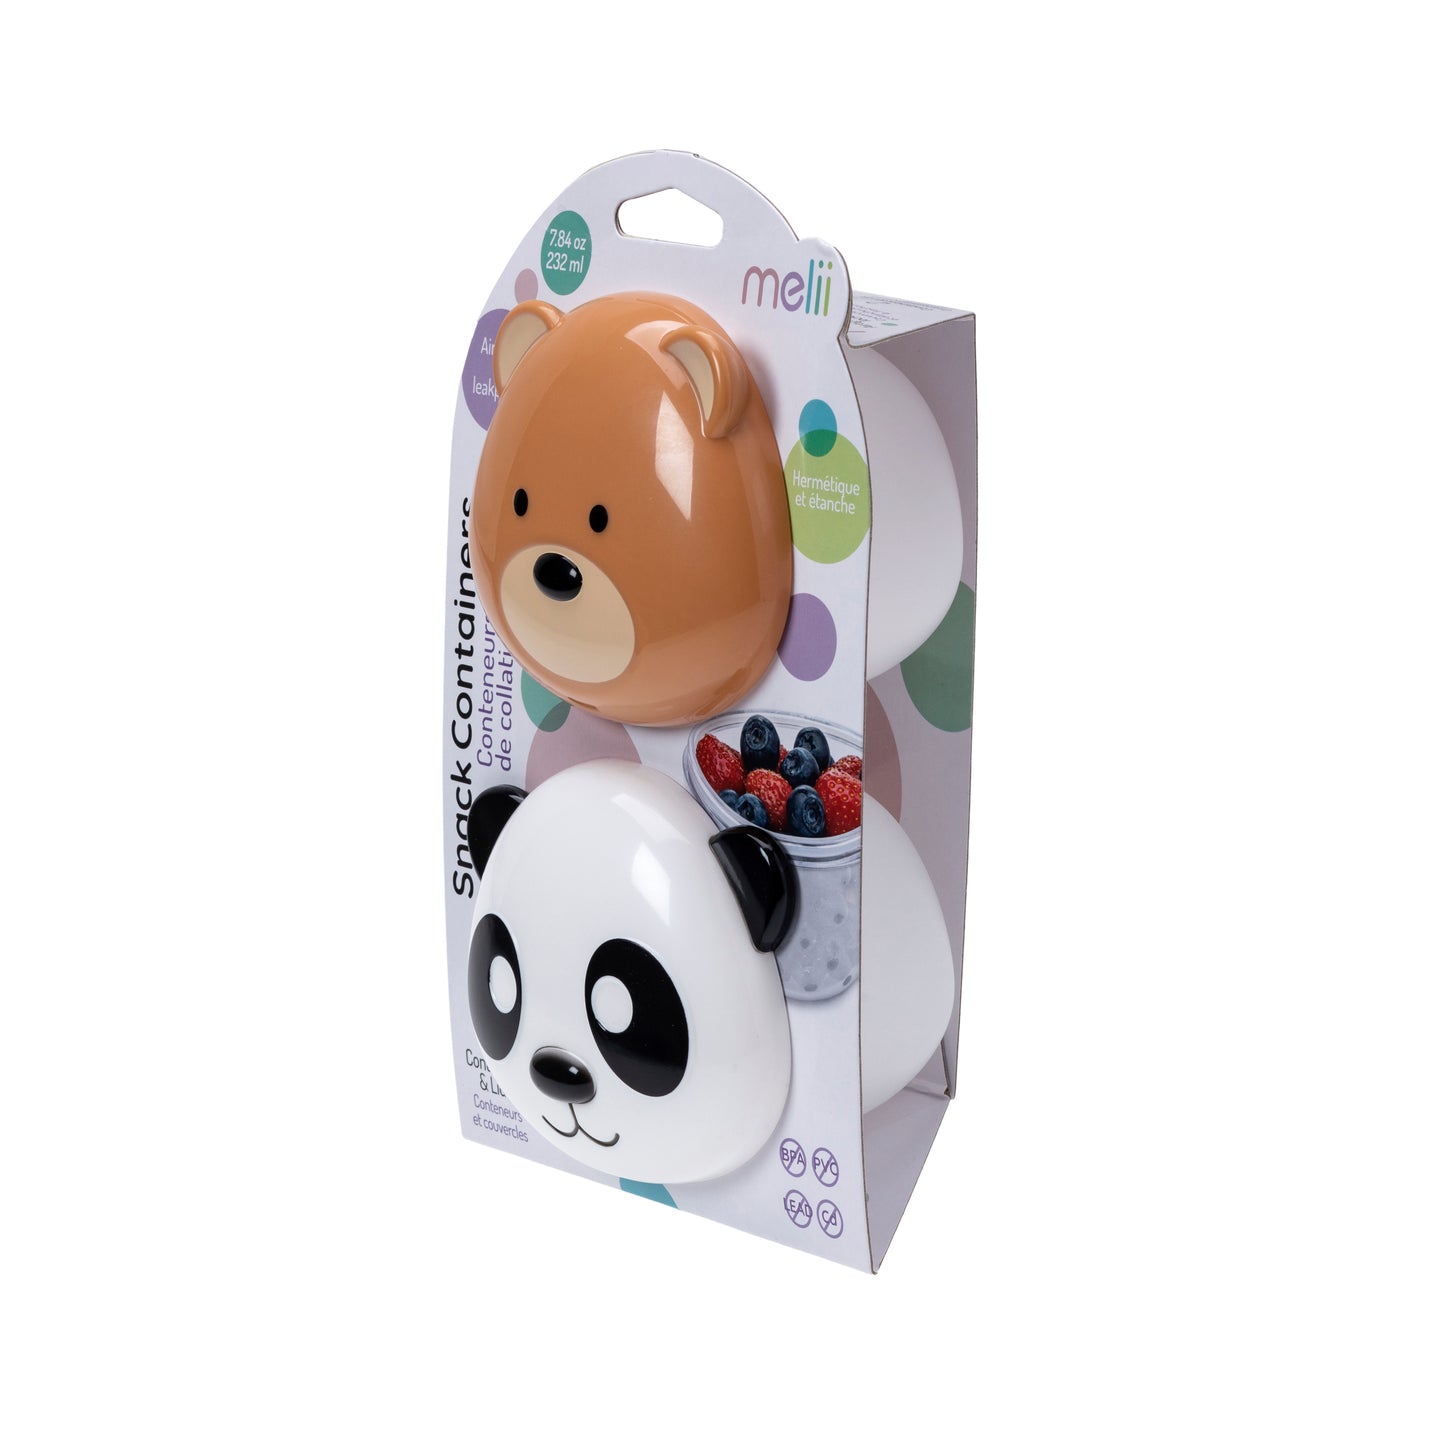 Melii Bear & Panda Snack Containers for Kids - Adorable Airtight, Leakproof Kids Food Storage Set for On-the-Go Joyful Snacking - BPA-Free, Easy to Clean